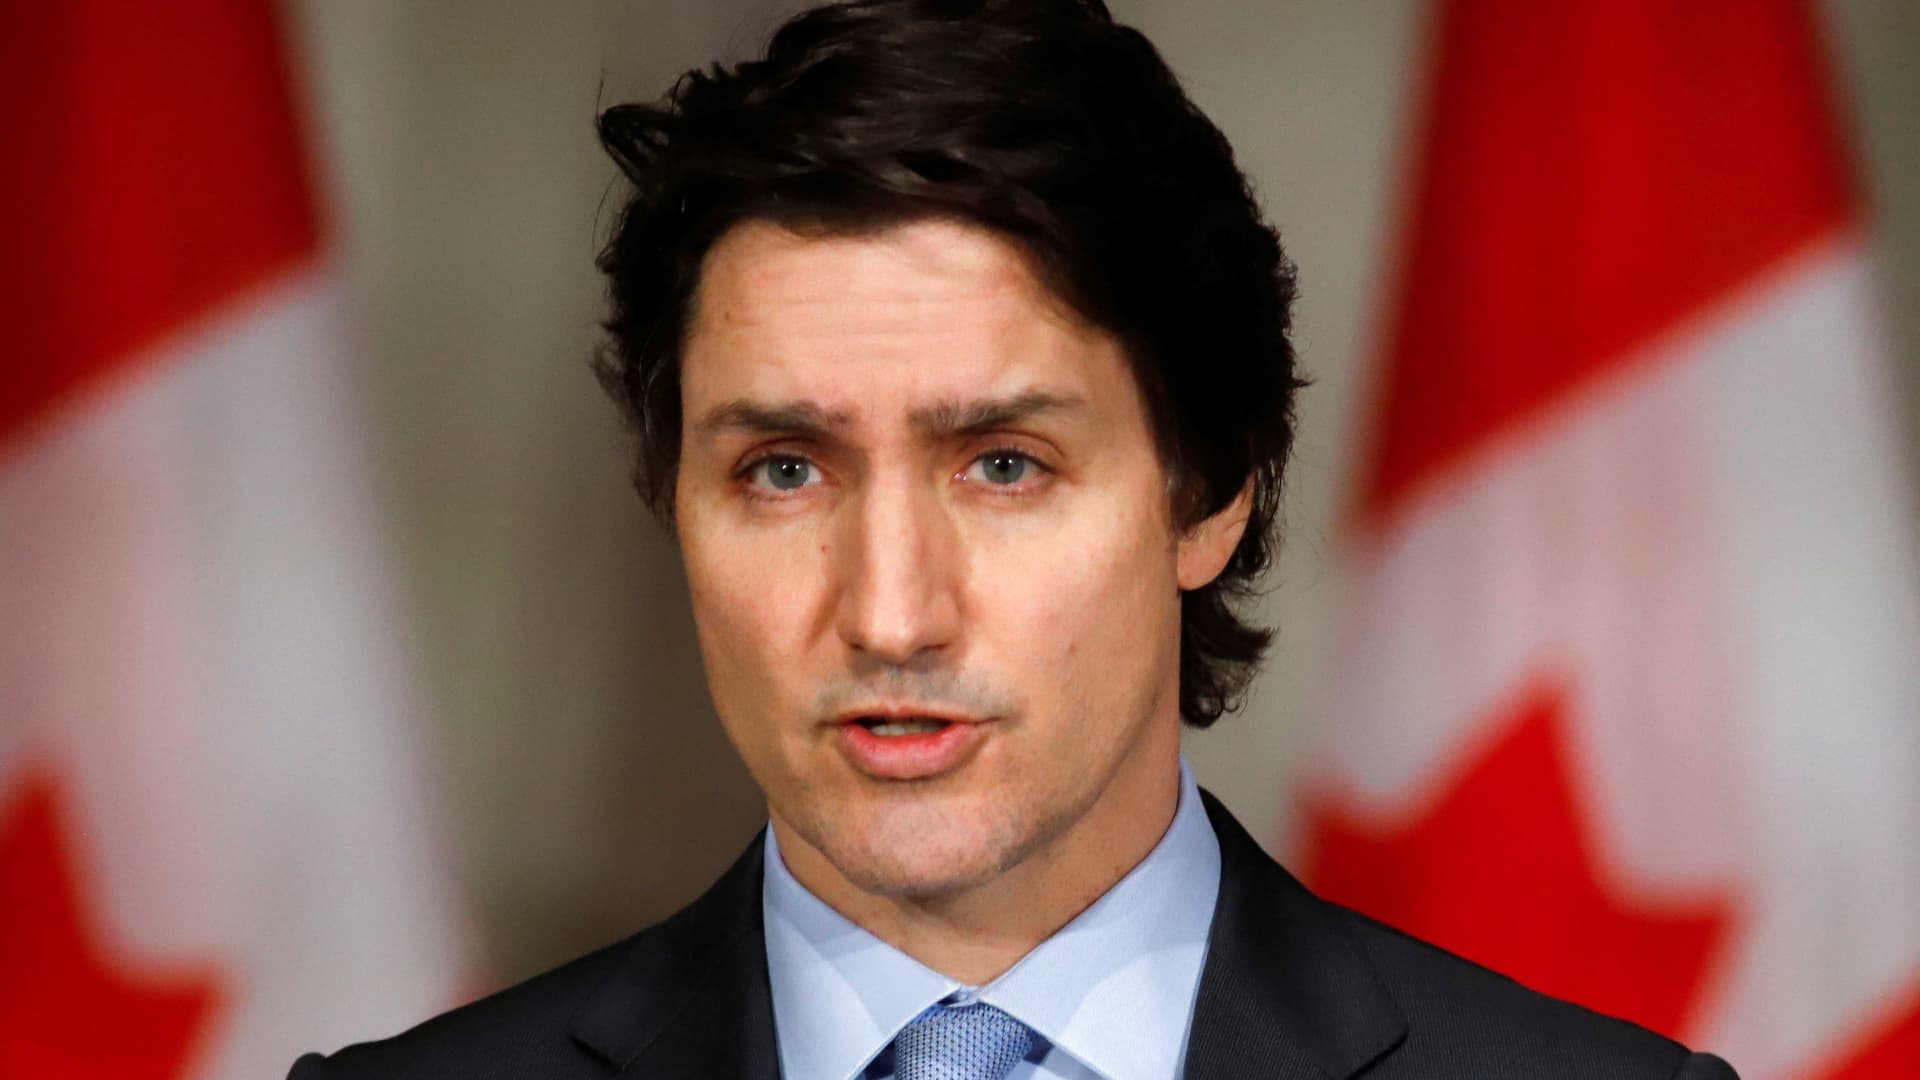 Canada's Prime Minister Justin Trudeau speaks at a news conference about the situation in Ukraine in Ottawa, Ontario, Canada, February 22, 2022.